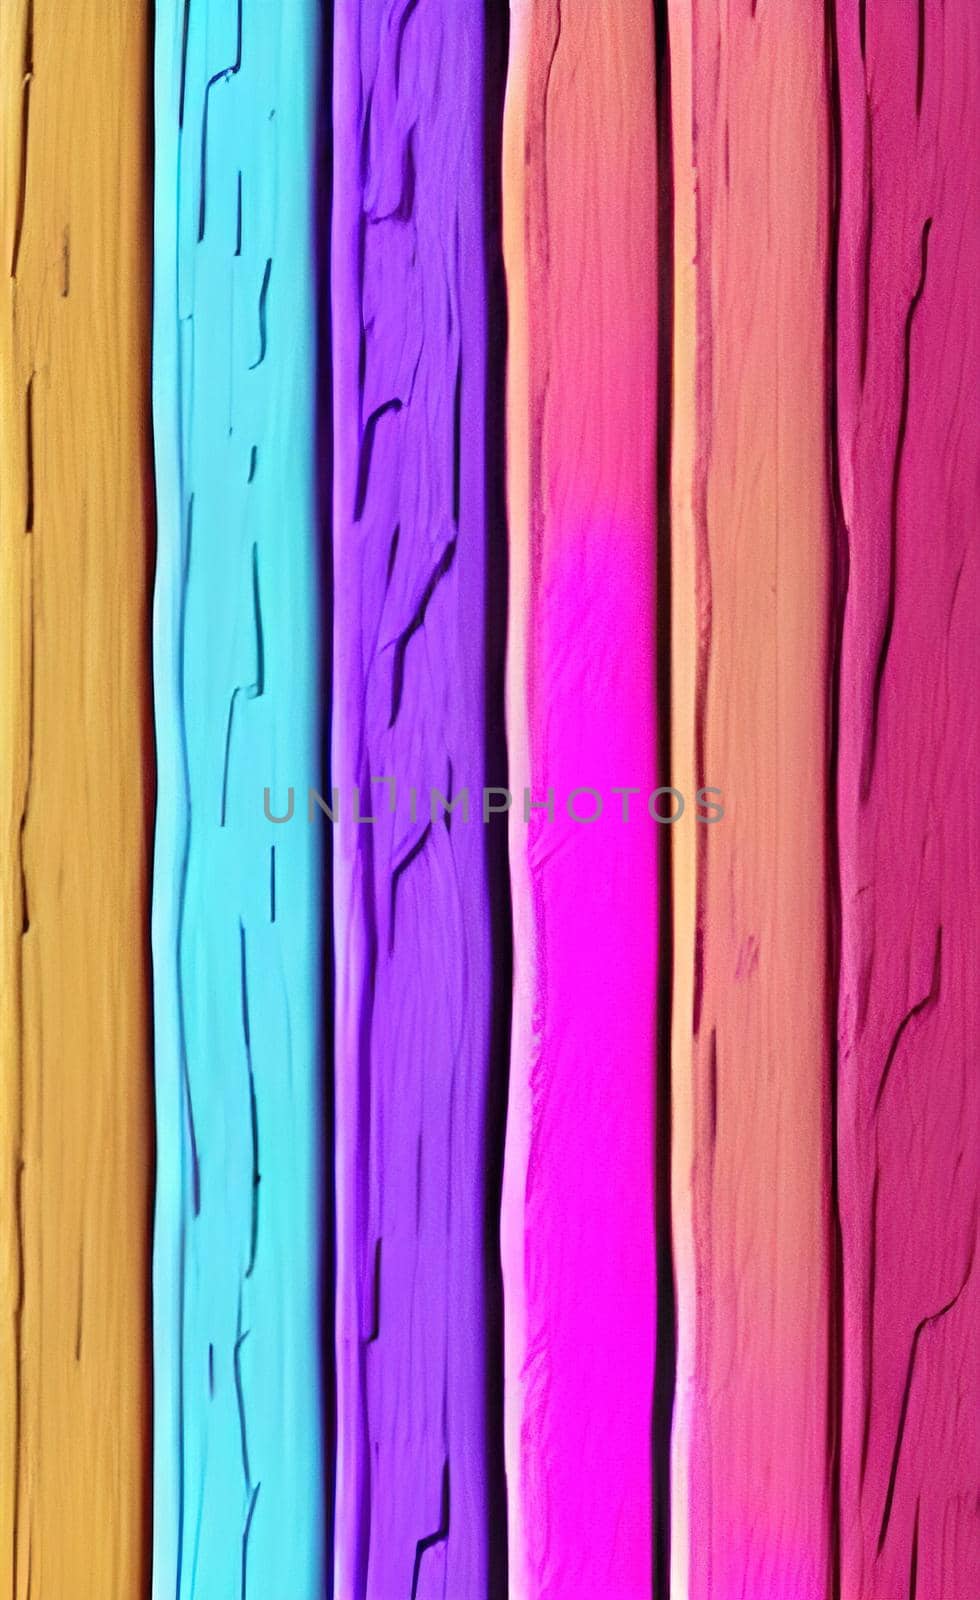 vertical background with wooden pattern and multicolor by yilmazsavaskandag